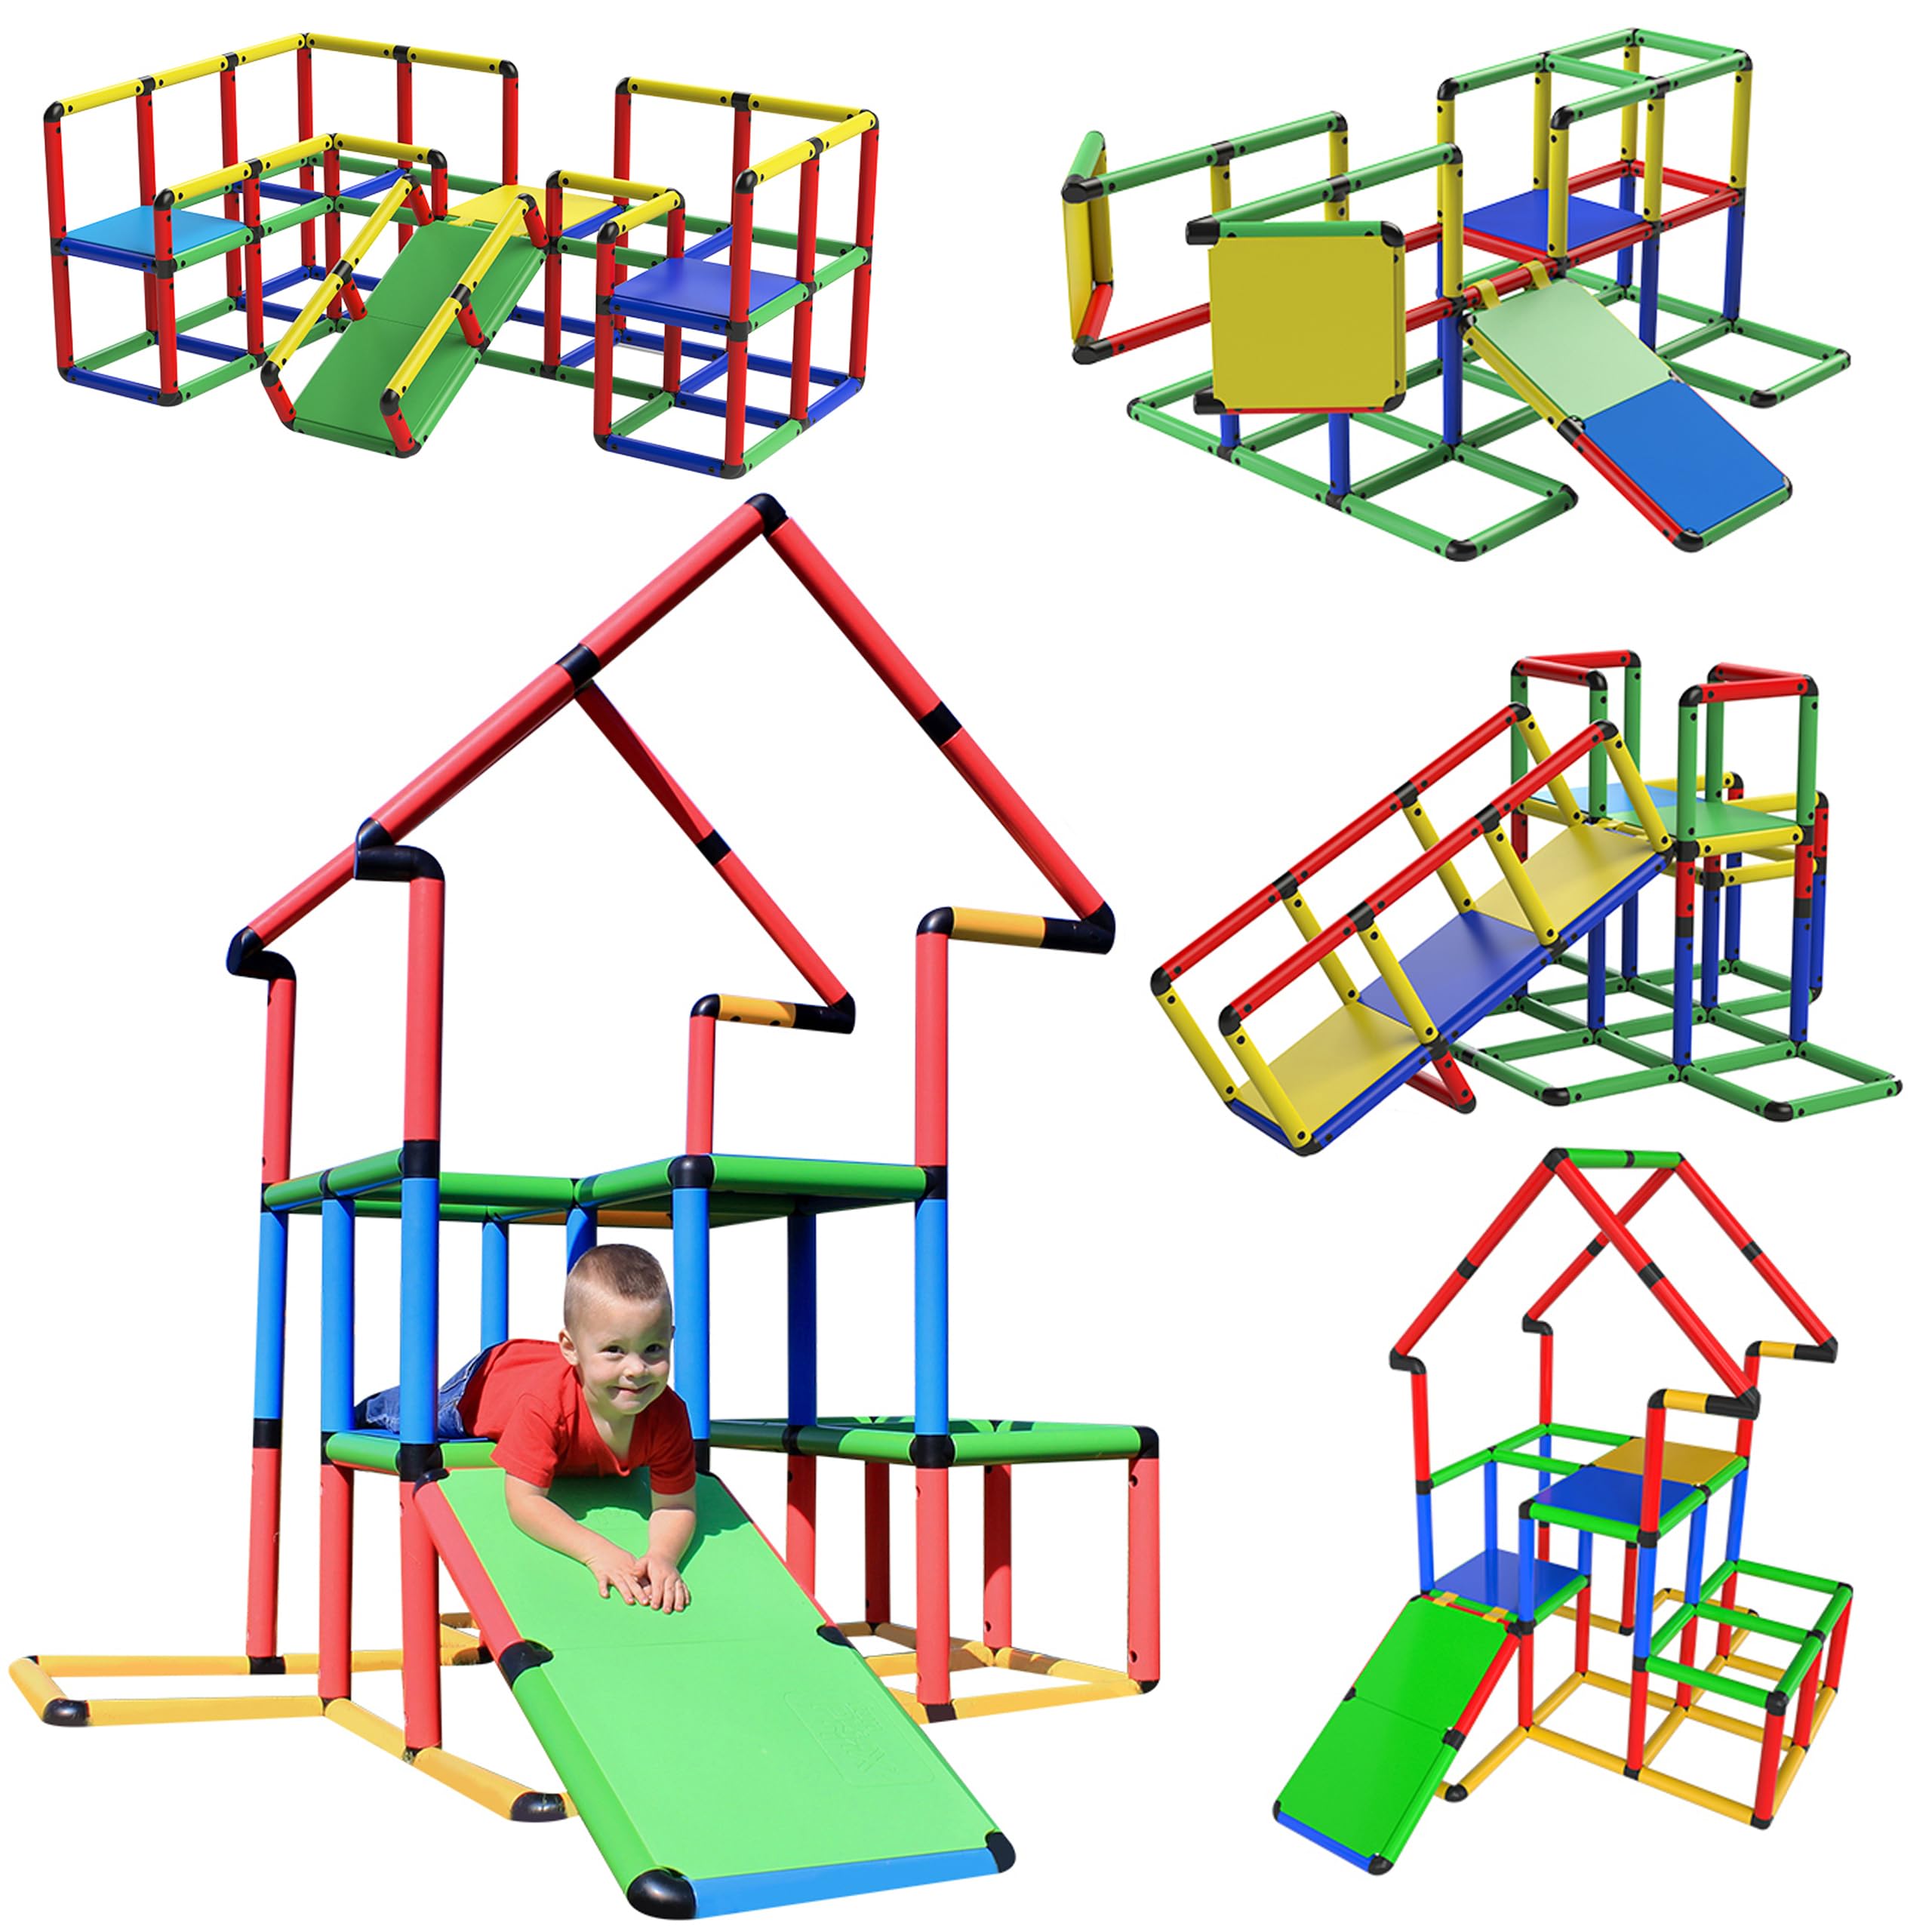 Funphix Kids Playground Set Jumbo 467-Pc Construction Set with Toddler Slide, Indoor Climbing for Kids, & Jungle Gym - Multifunctional Kids Outdoor Playhouse for Indoor Sports & Outdoor Play Toys